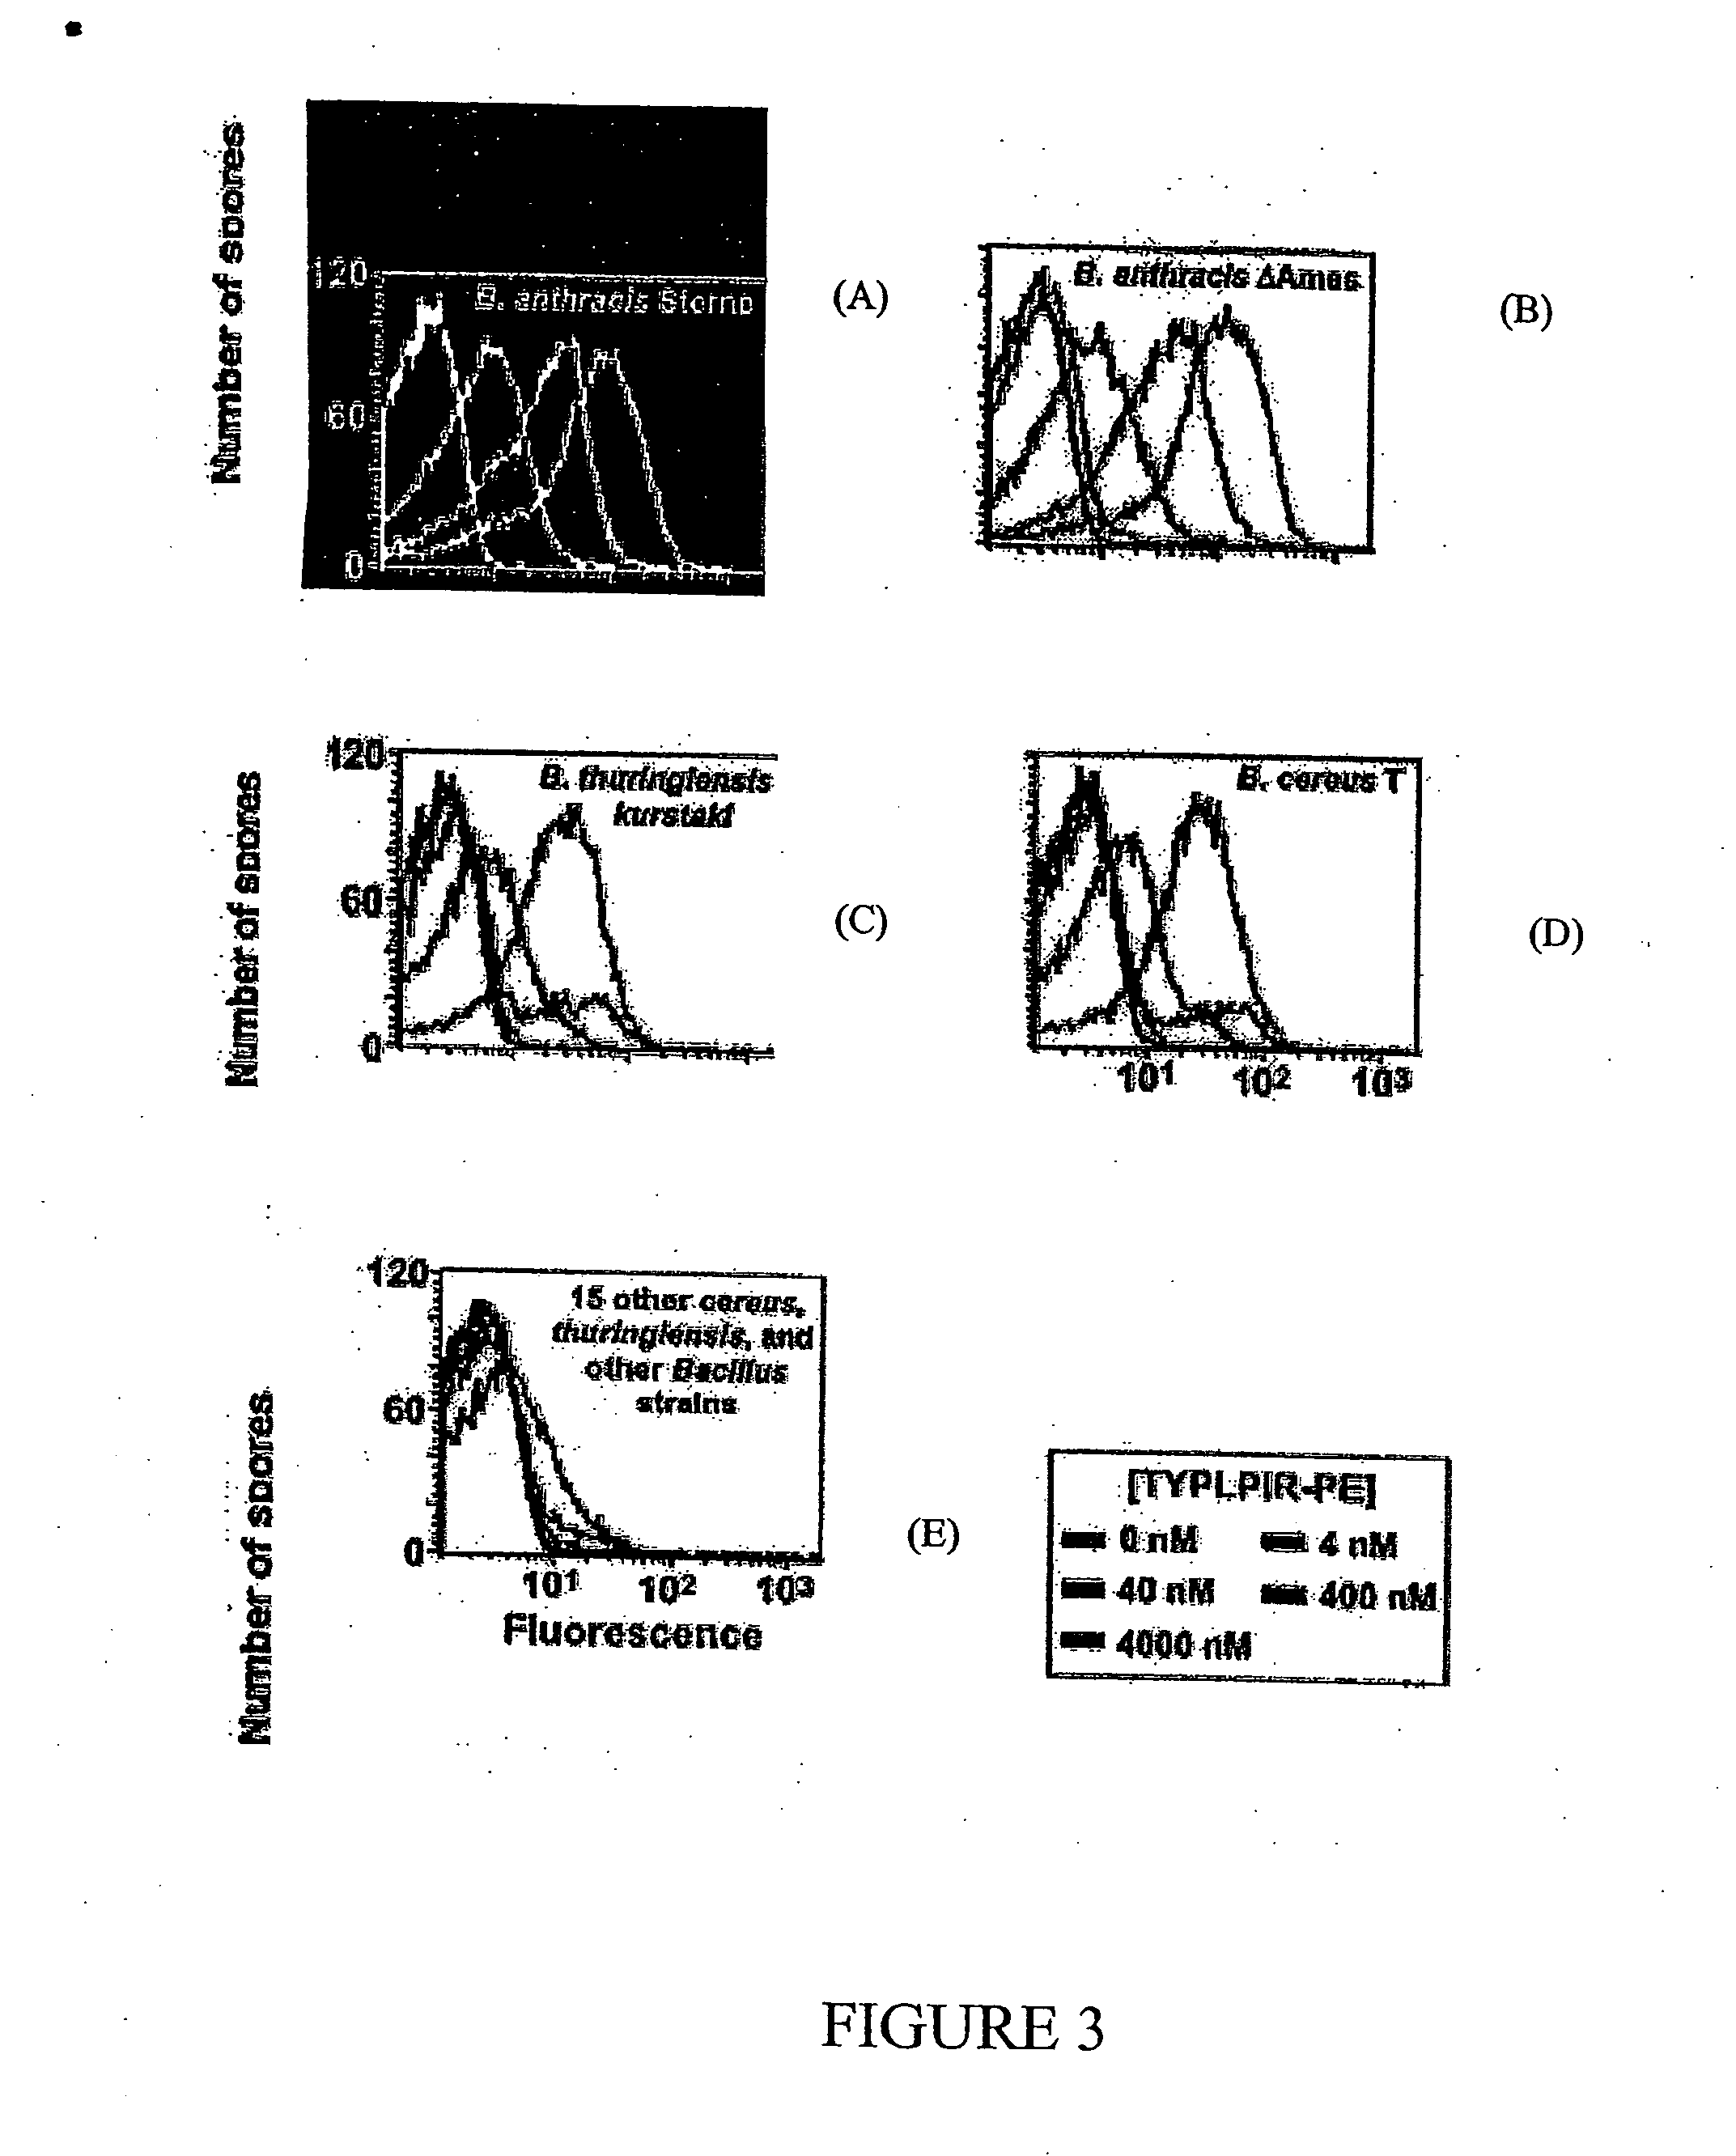 Monoclonal antibodies specific for anthrax spores and peptides derived from the antibodies thereof